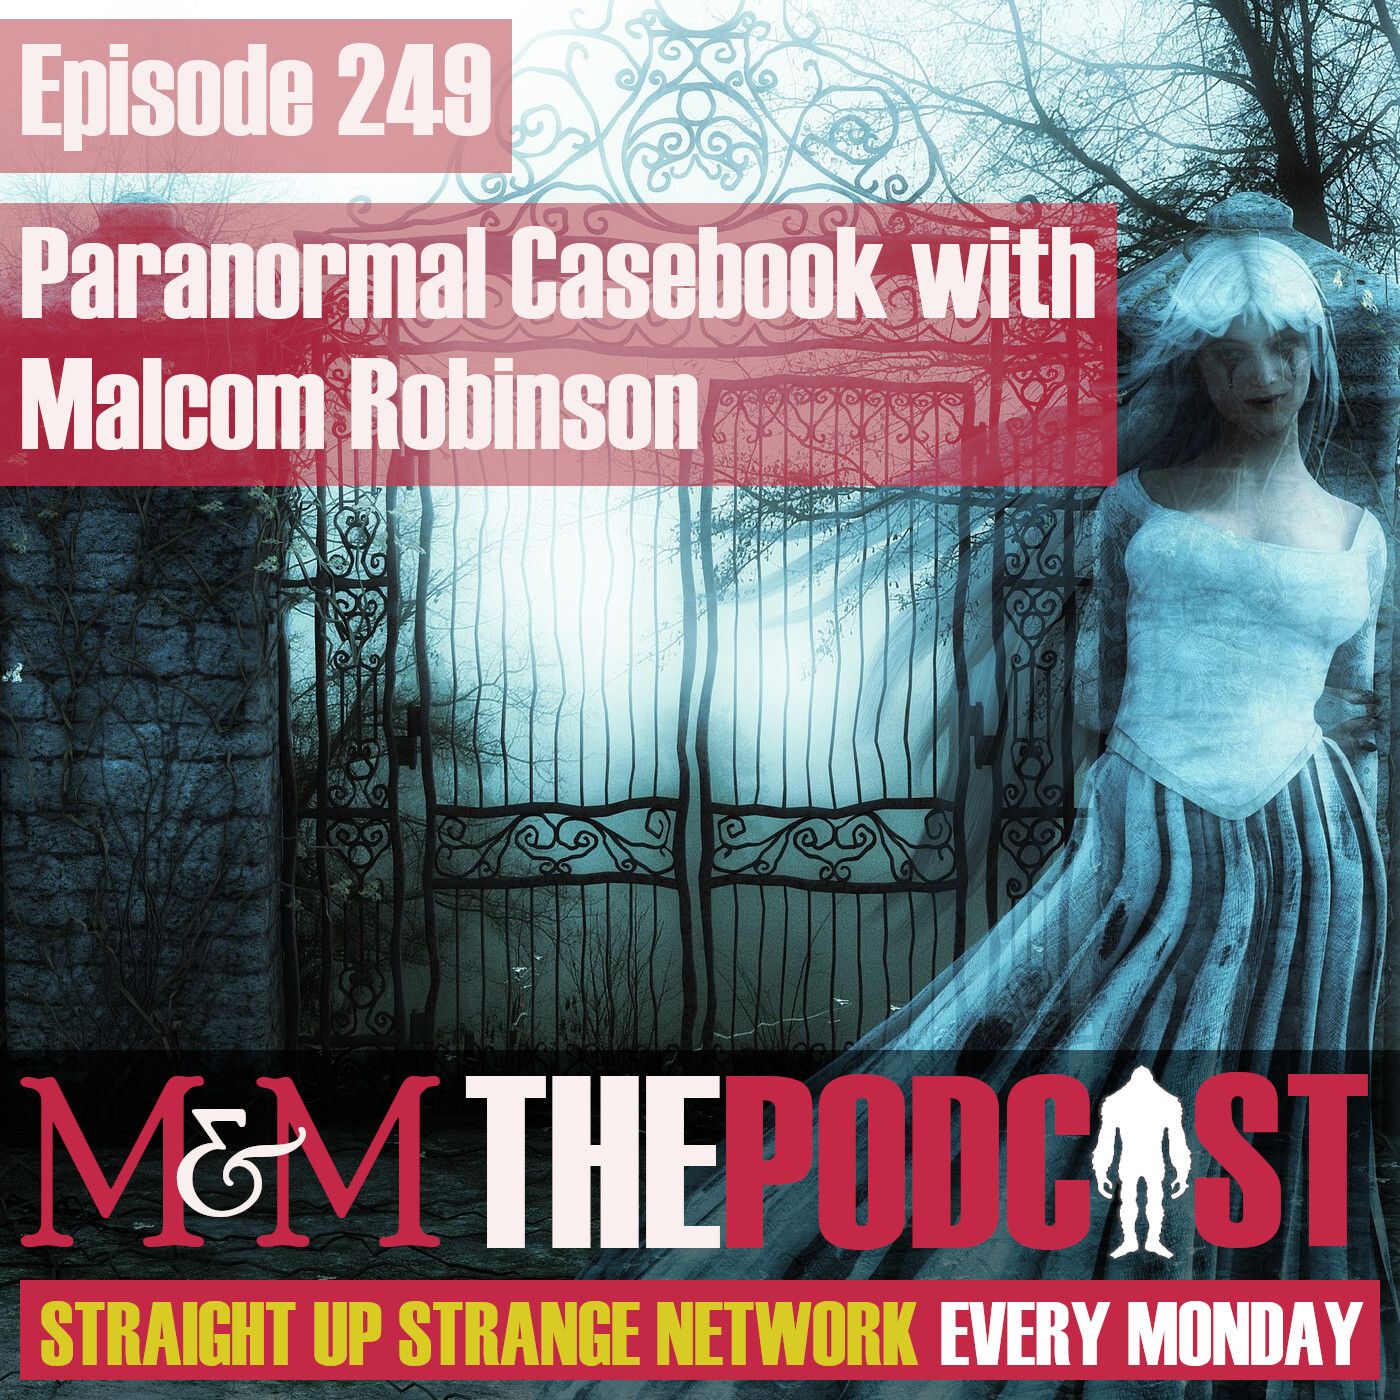 Mysteries and Monsters: Episode 249 Paranormal Casebook with Malcolm Robinson